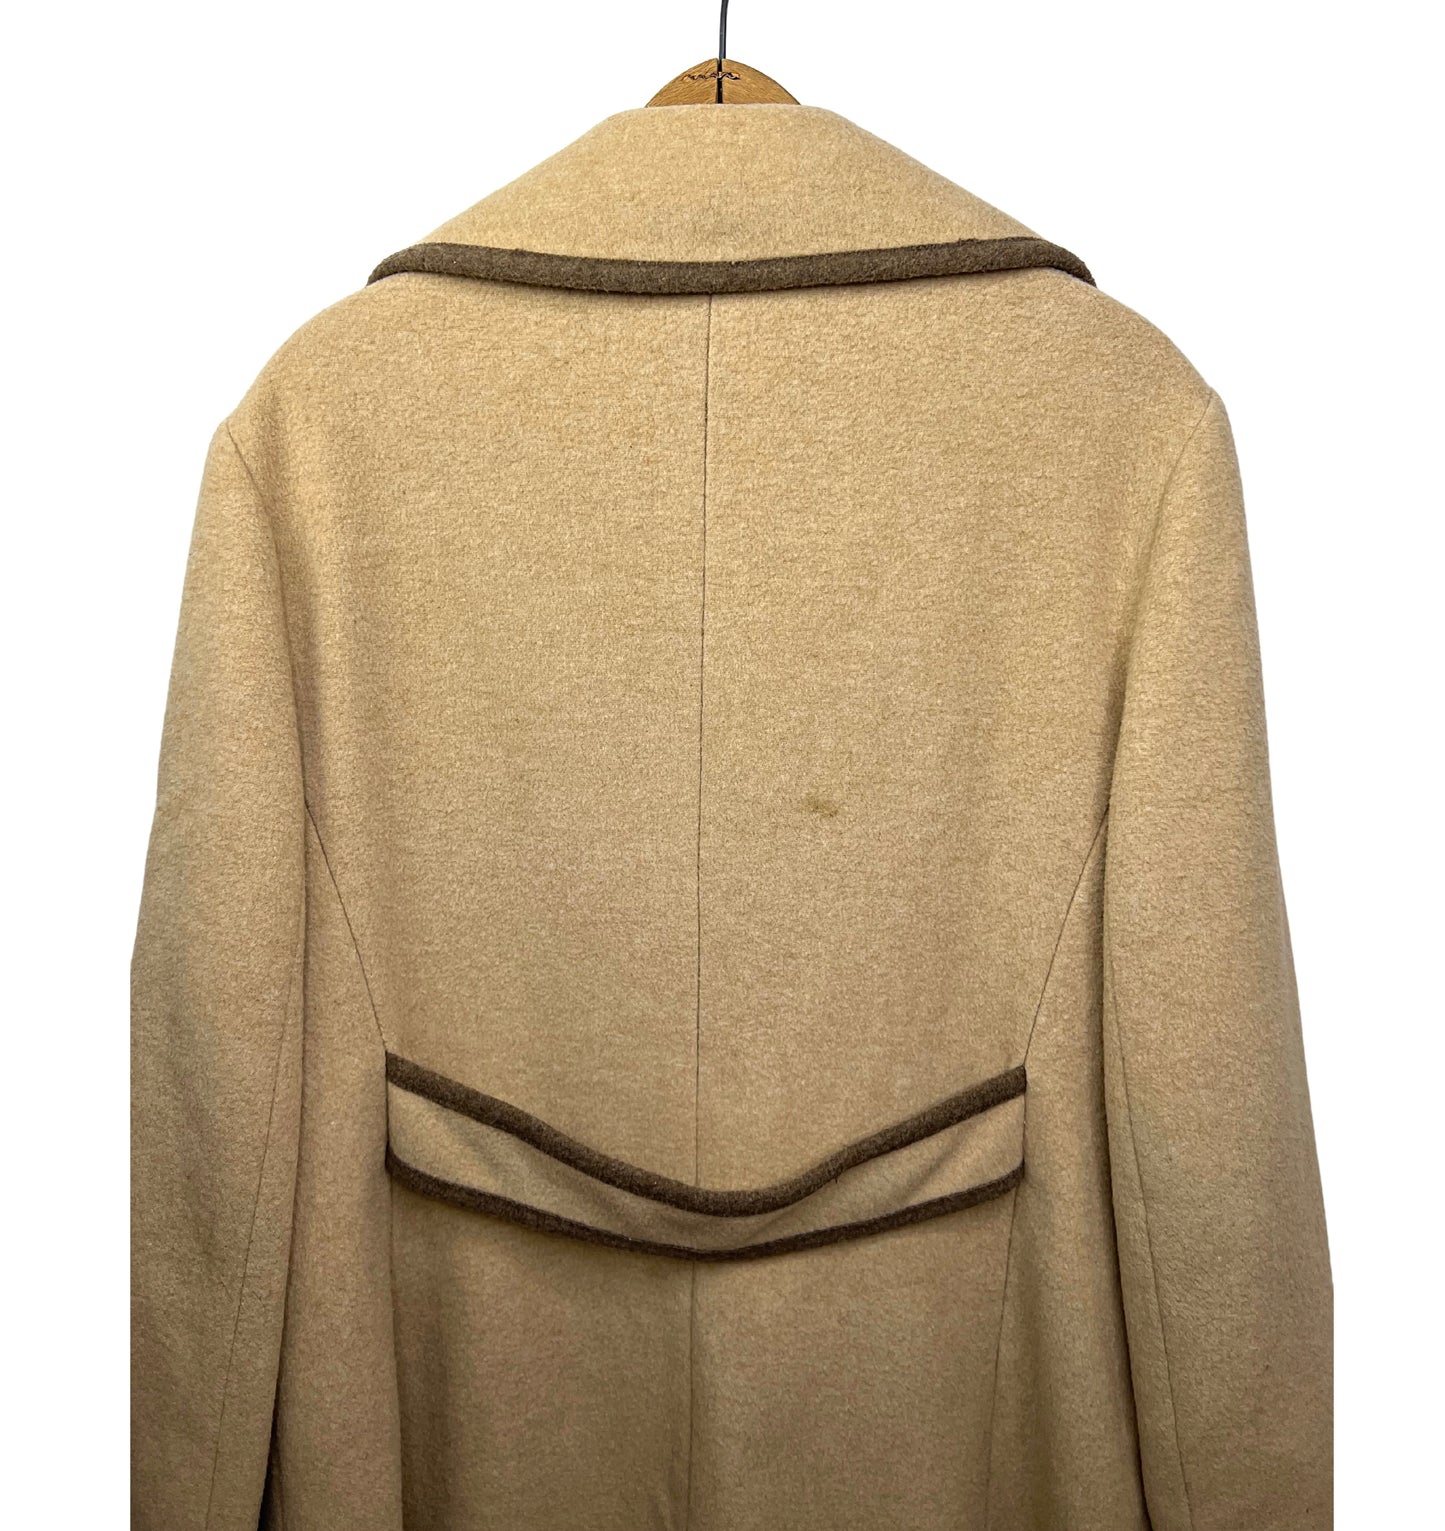 60’s Tan Wool Mackintosh Double-Breasted Peacoat Size Large